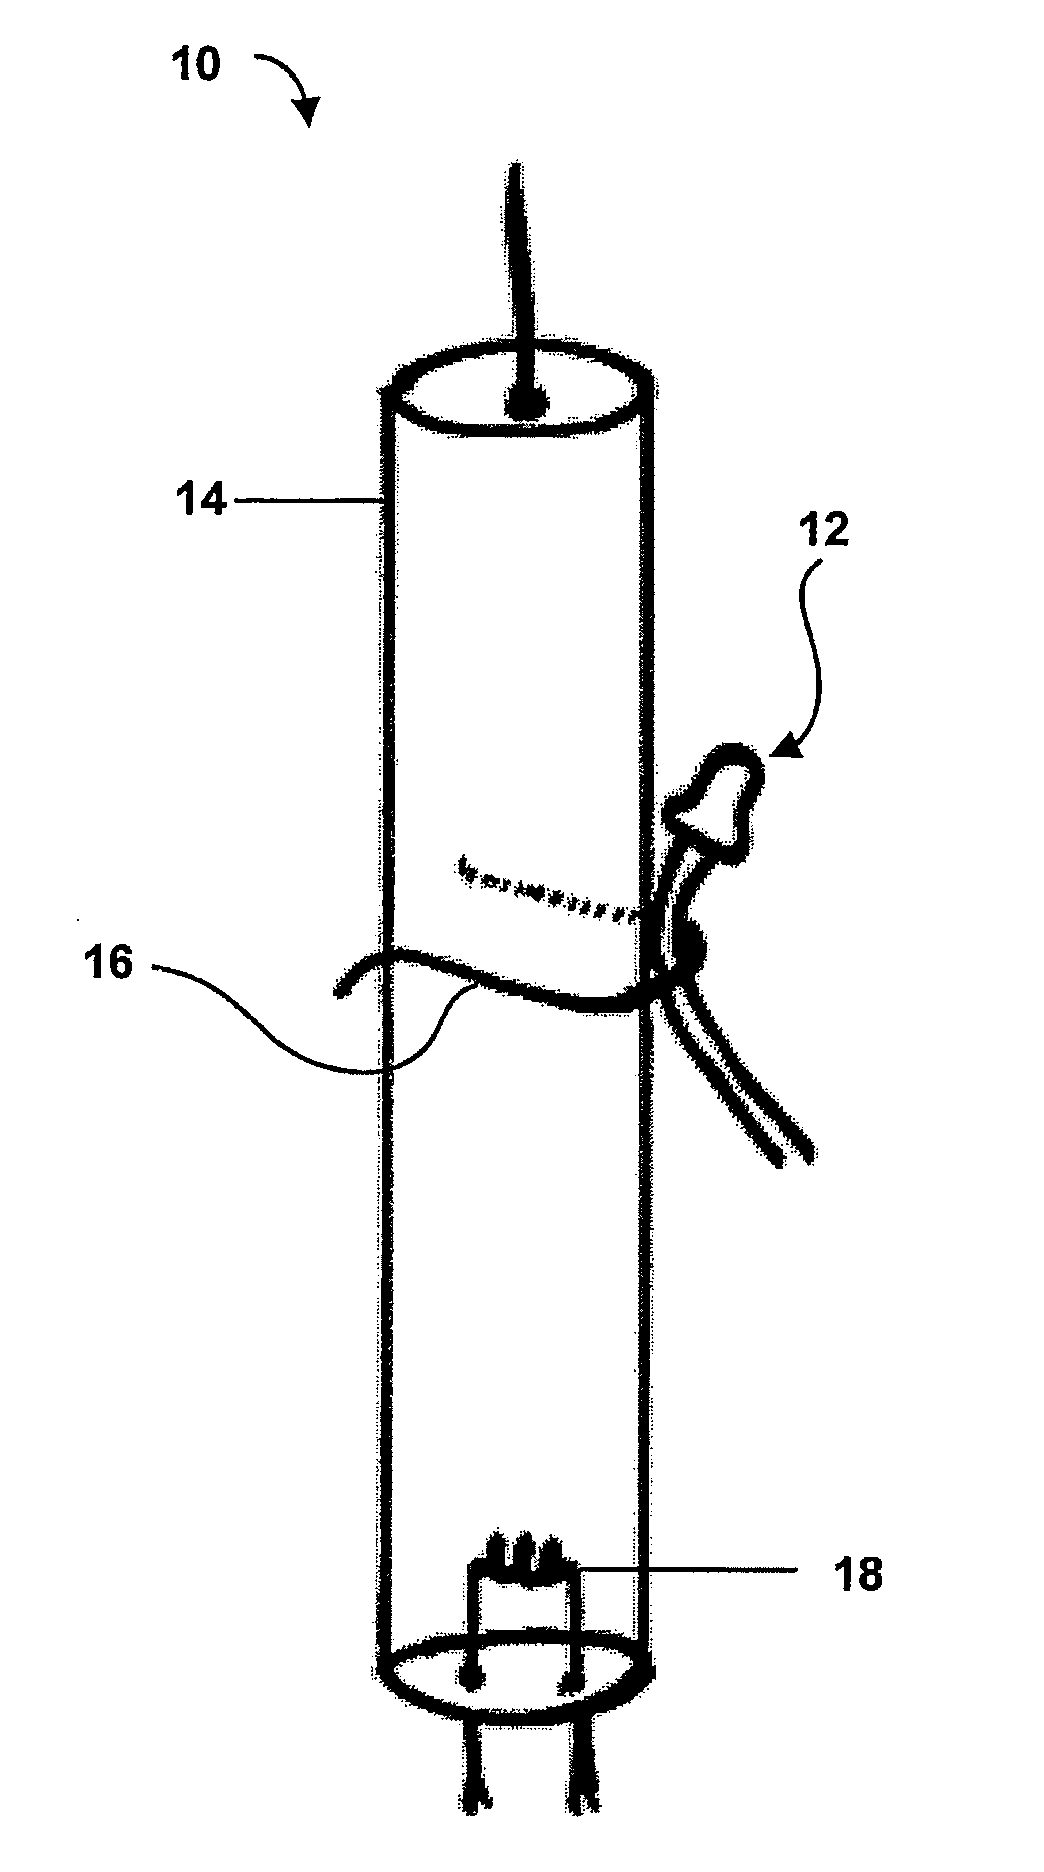 System and Method of Monitoring an Electronic Discharge Device in an Air Purification System